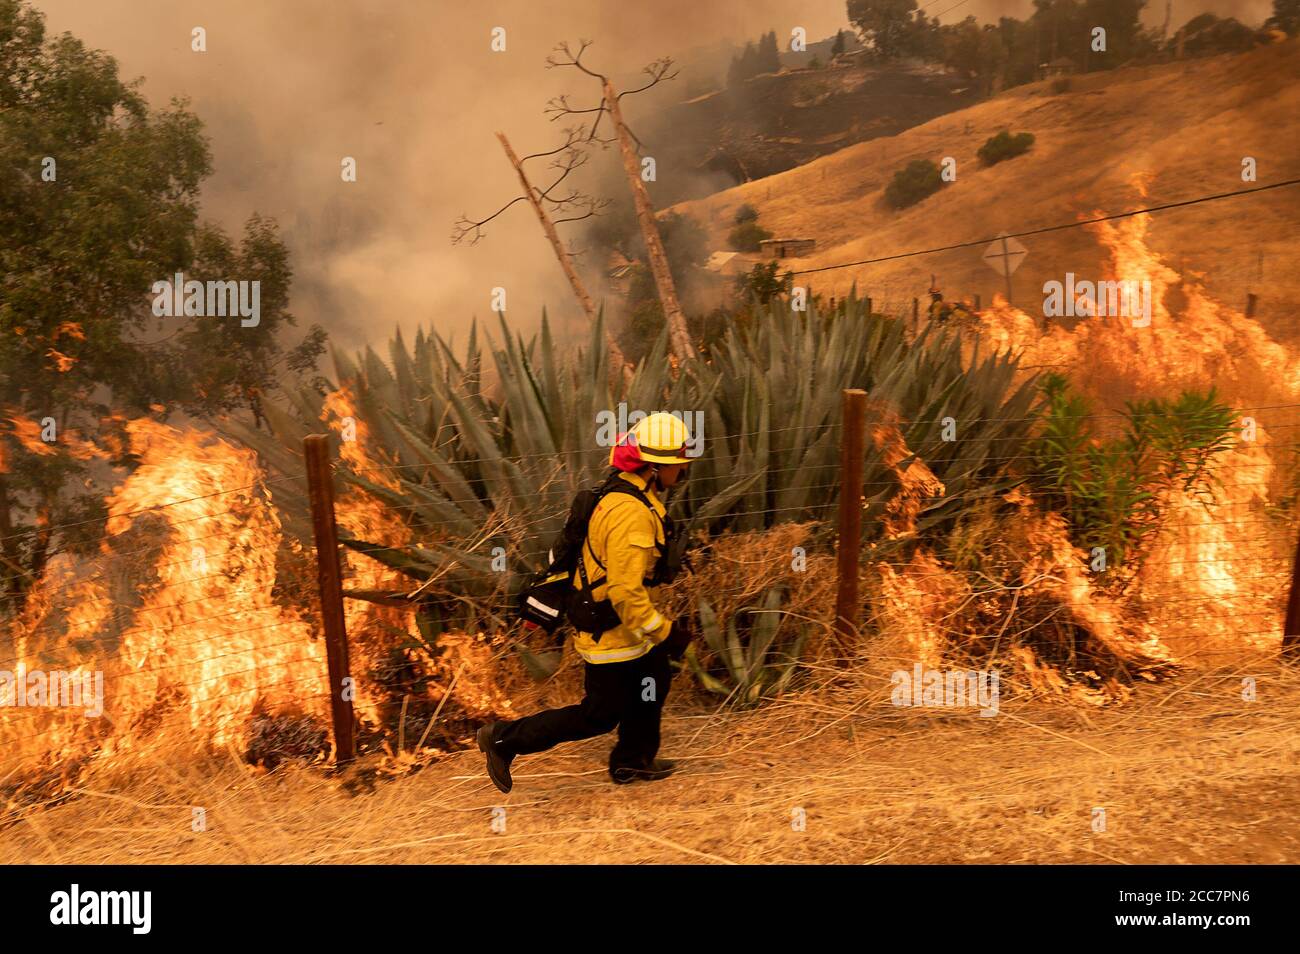 Vacaville, California, USA. 19th Aug, 2020. Huntington Beach fire department members battle the LNU Lightning Complex fires on Serenity Hills Road. It is a rapidly spreading wildfire that spread towards Vacaville early Wednesday, forcing urgent evacuations in parts of the city overnight. Credit: Paul Kitagaki Jr./ZUMA Wire/Alamy Live News Stock Photo